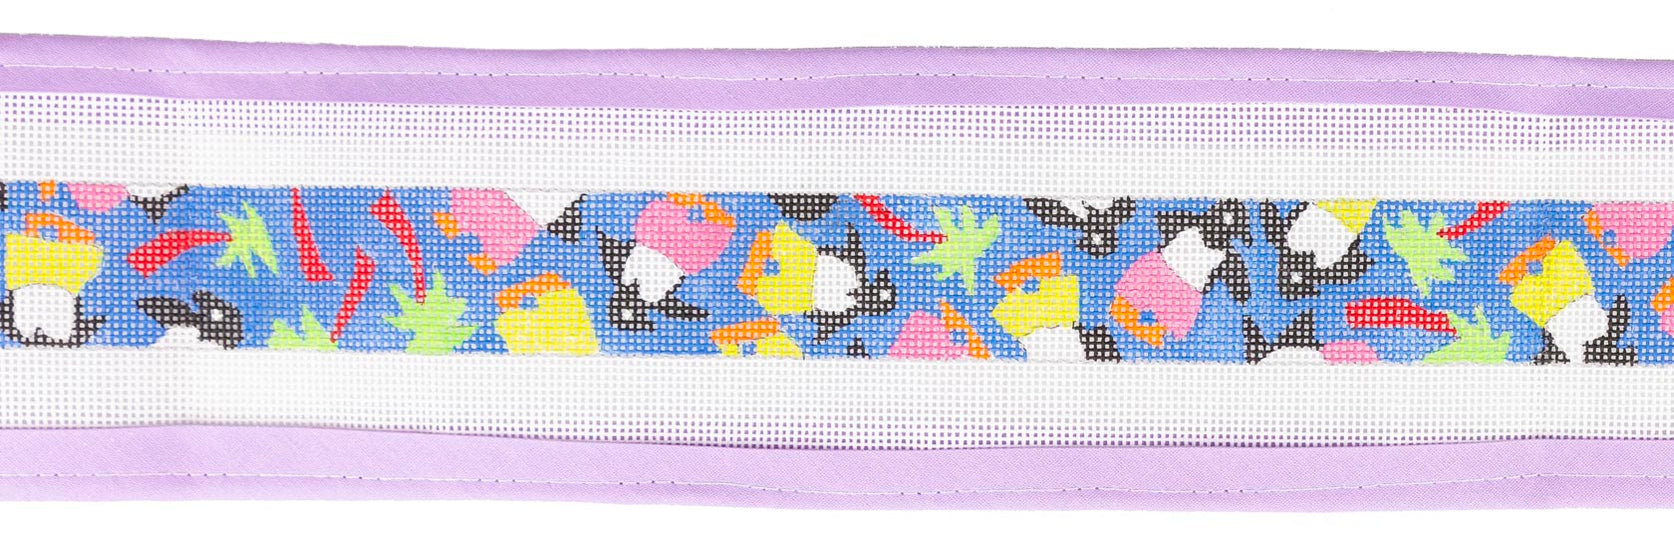 Needlepoint New Arrivals Collection - Lycette Designs